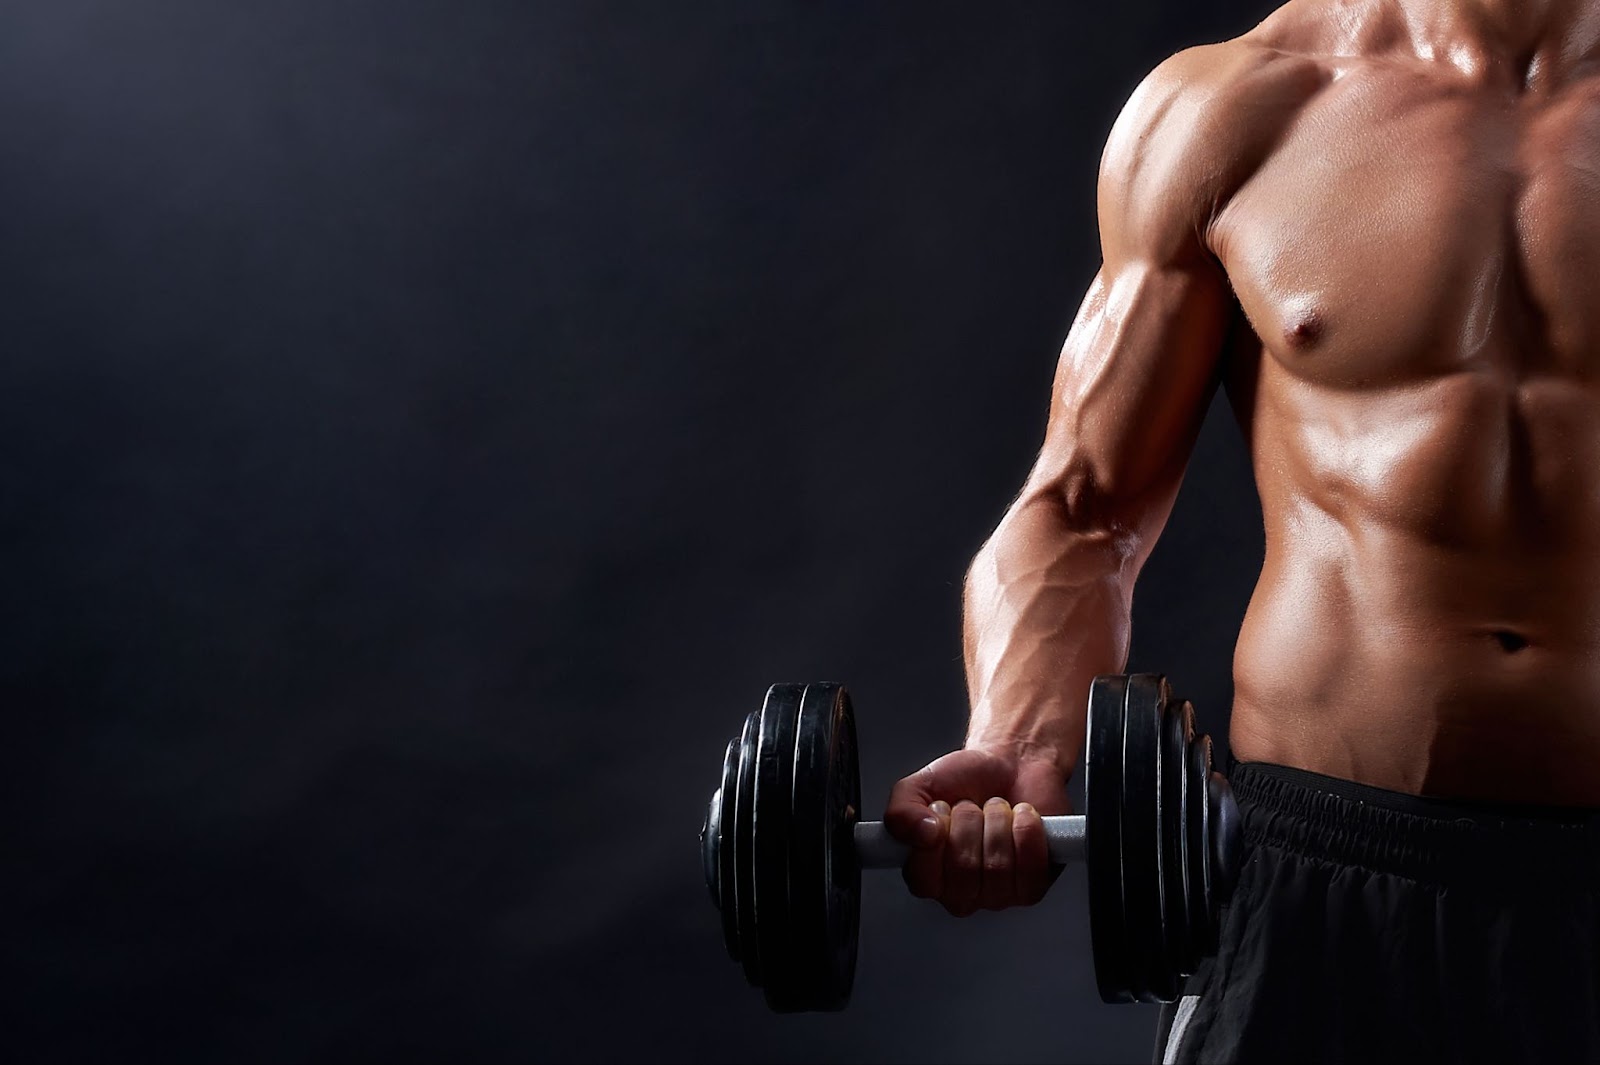 Muscle vs Fat: Does Muscle Weigh More?